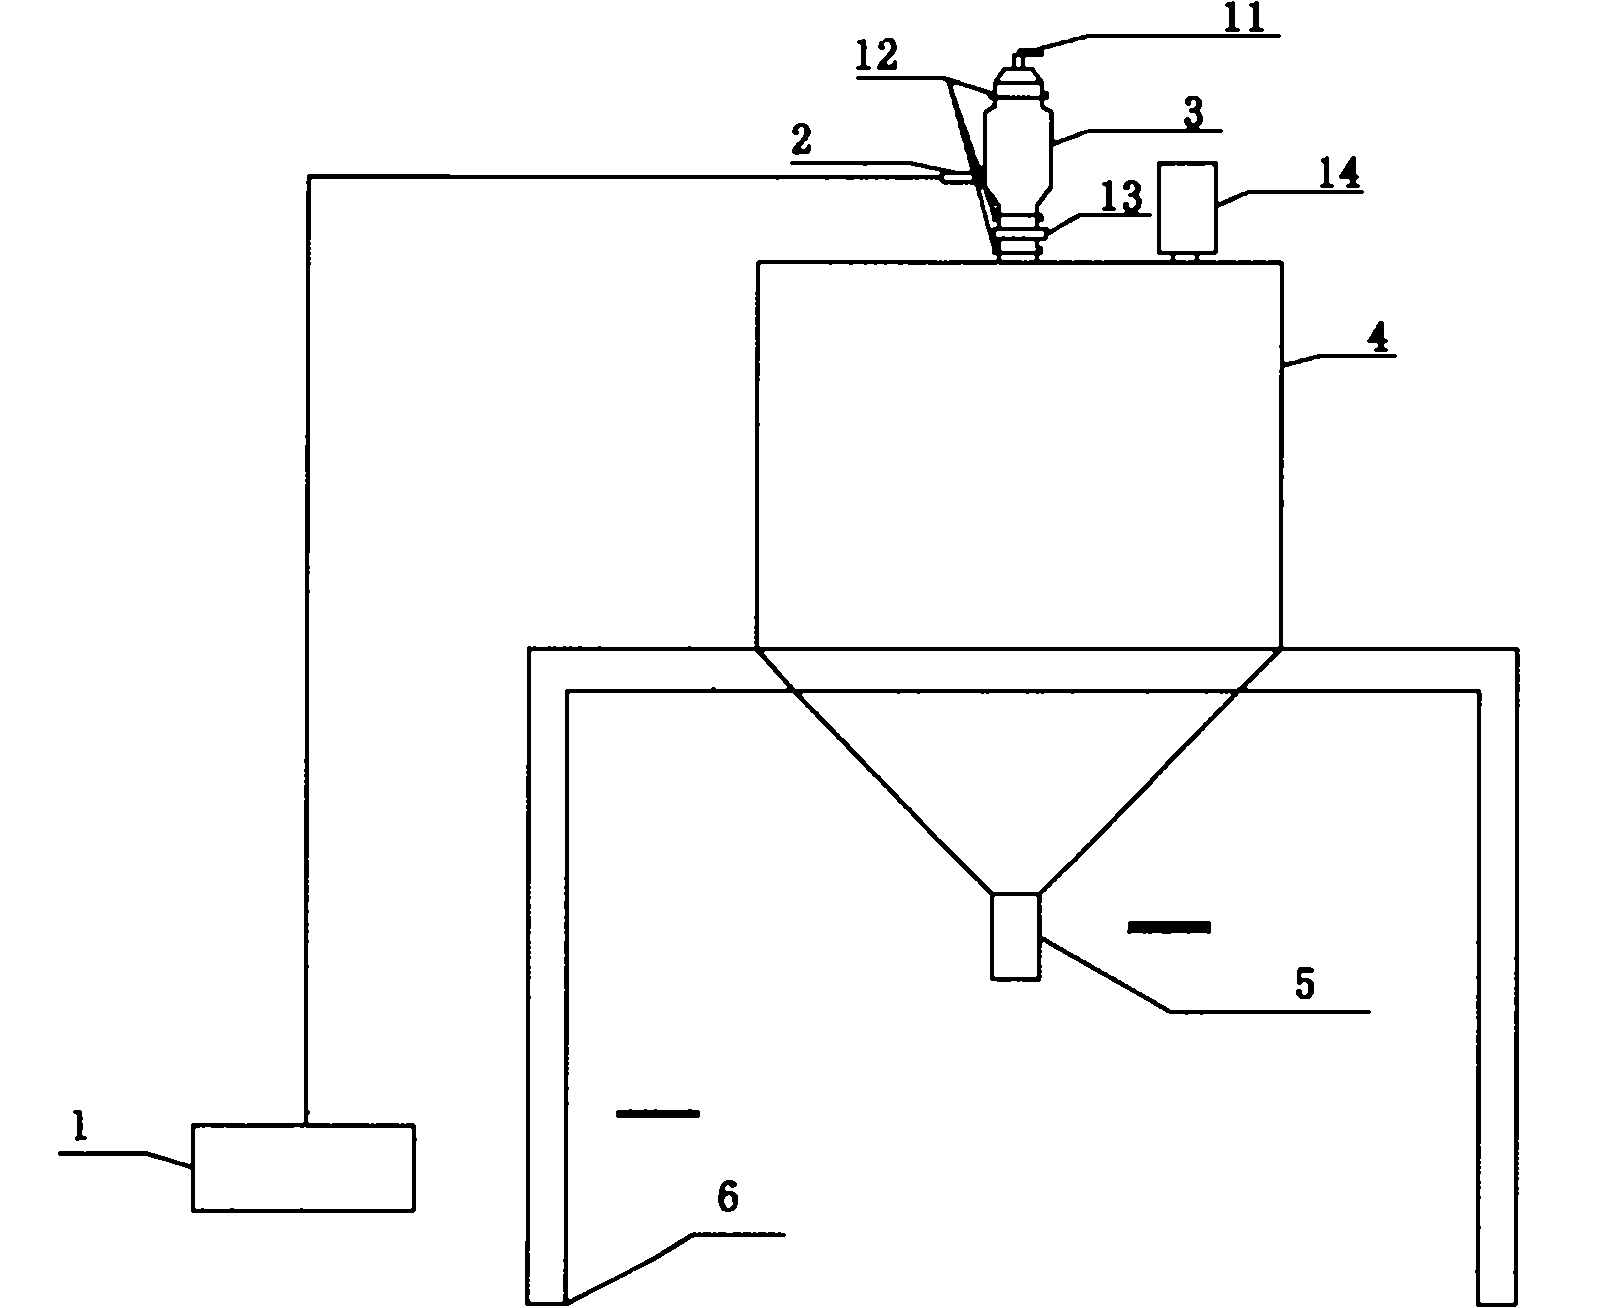 Process and equipment for producing graphite dust